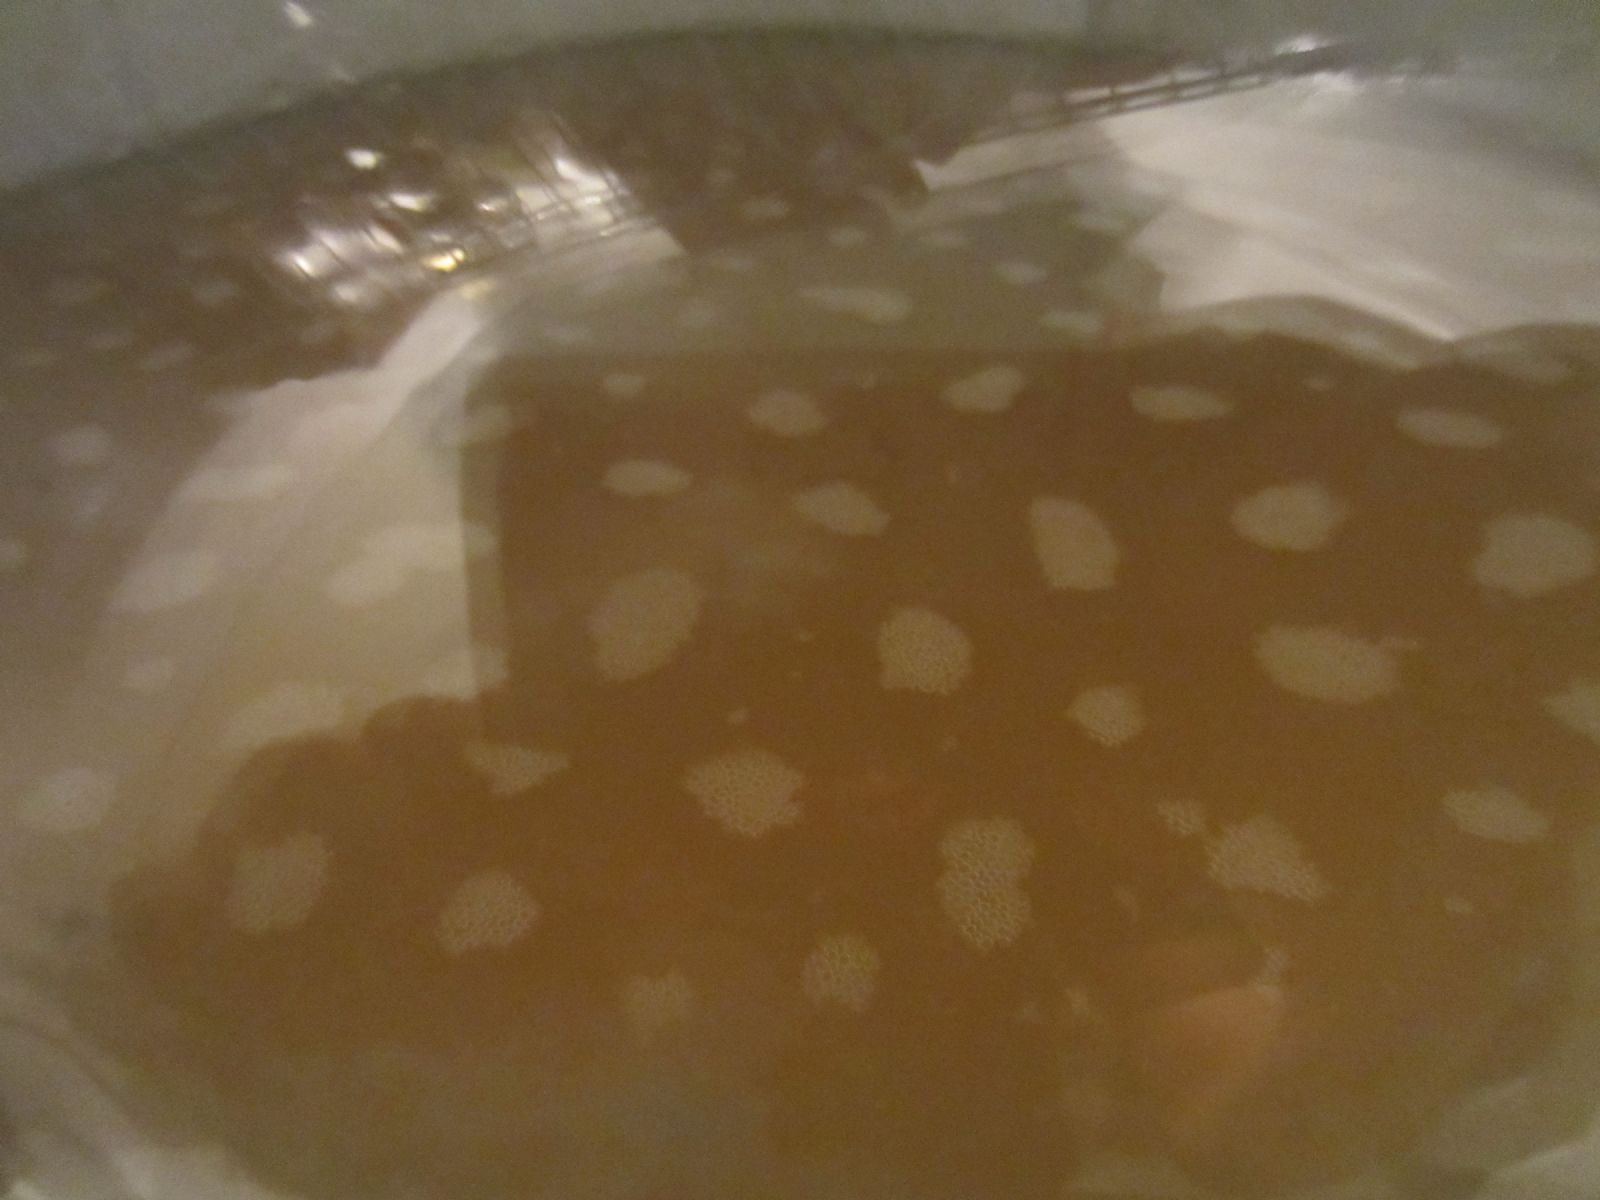 Initial Visual Indication of Yeast Growth